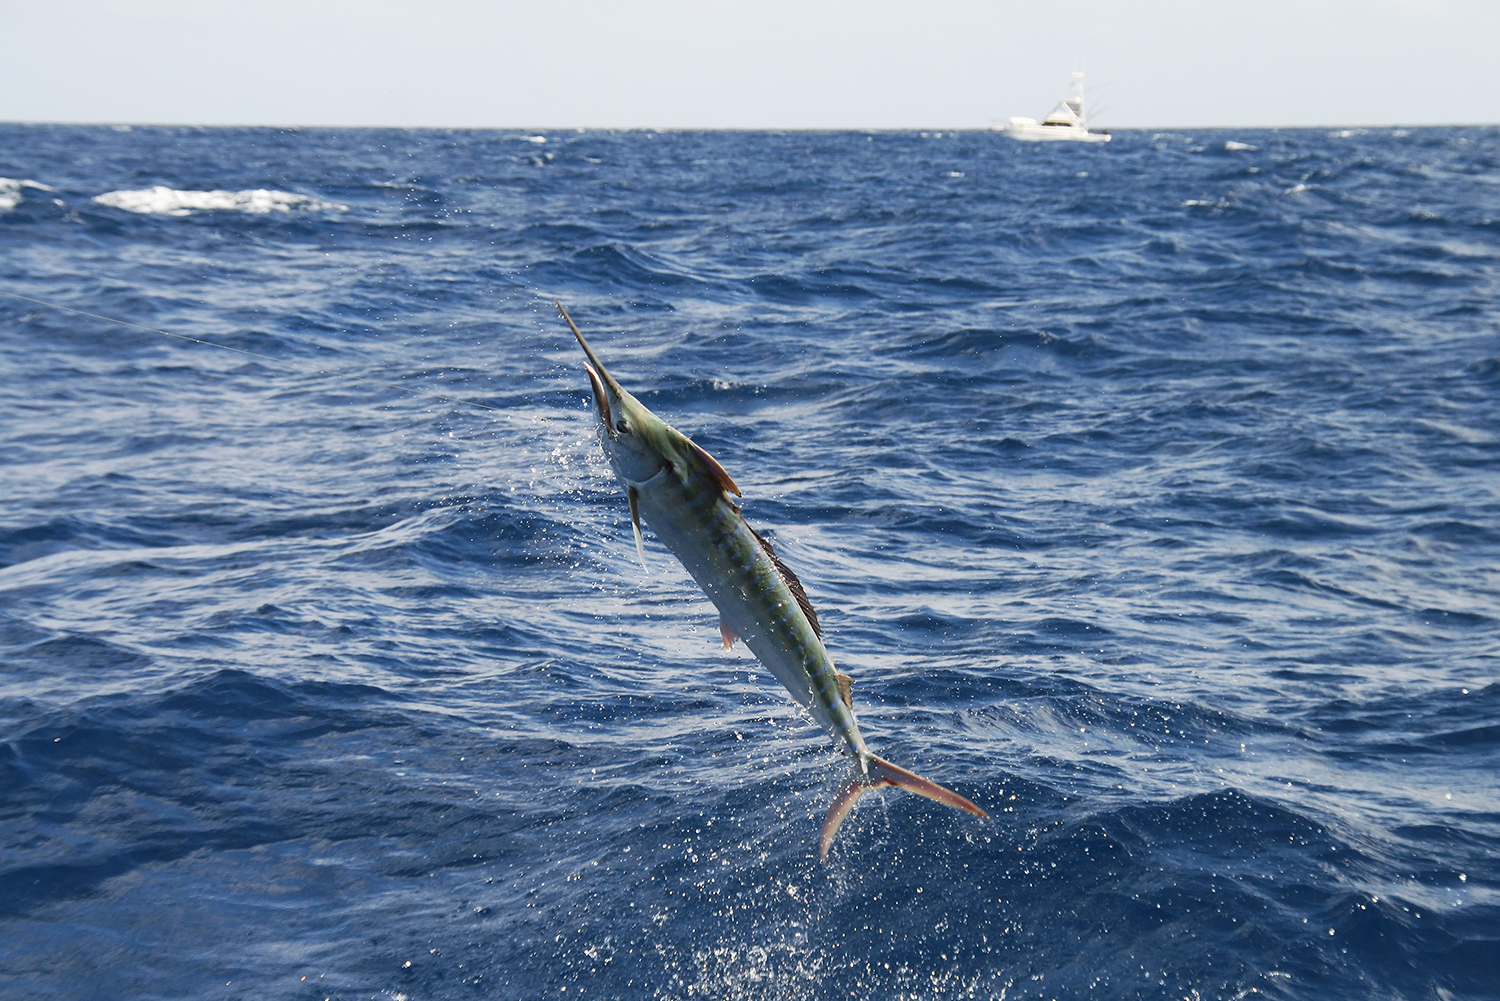 Juvenile Black Marlin Fishing in South East Queensland